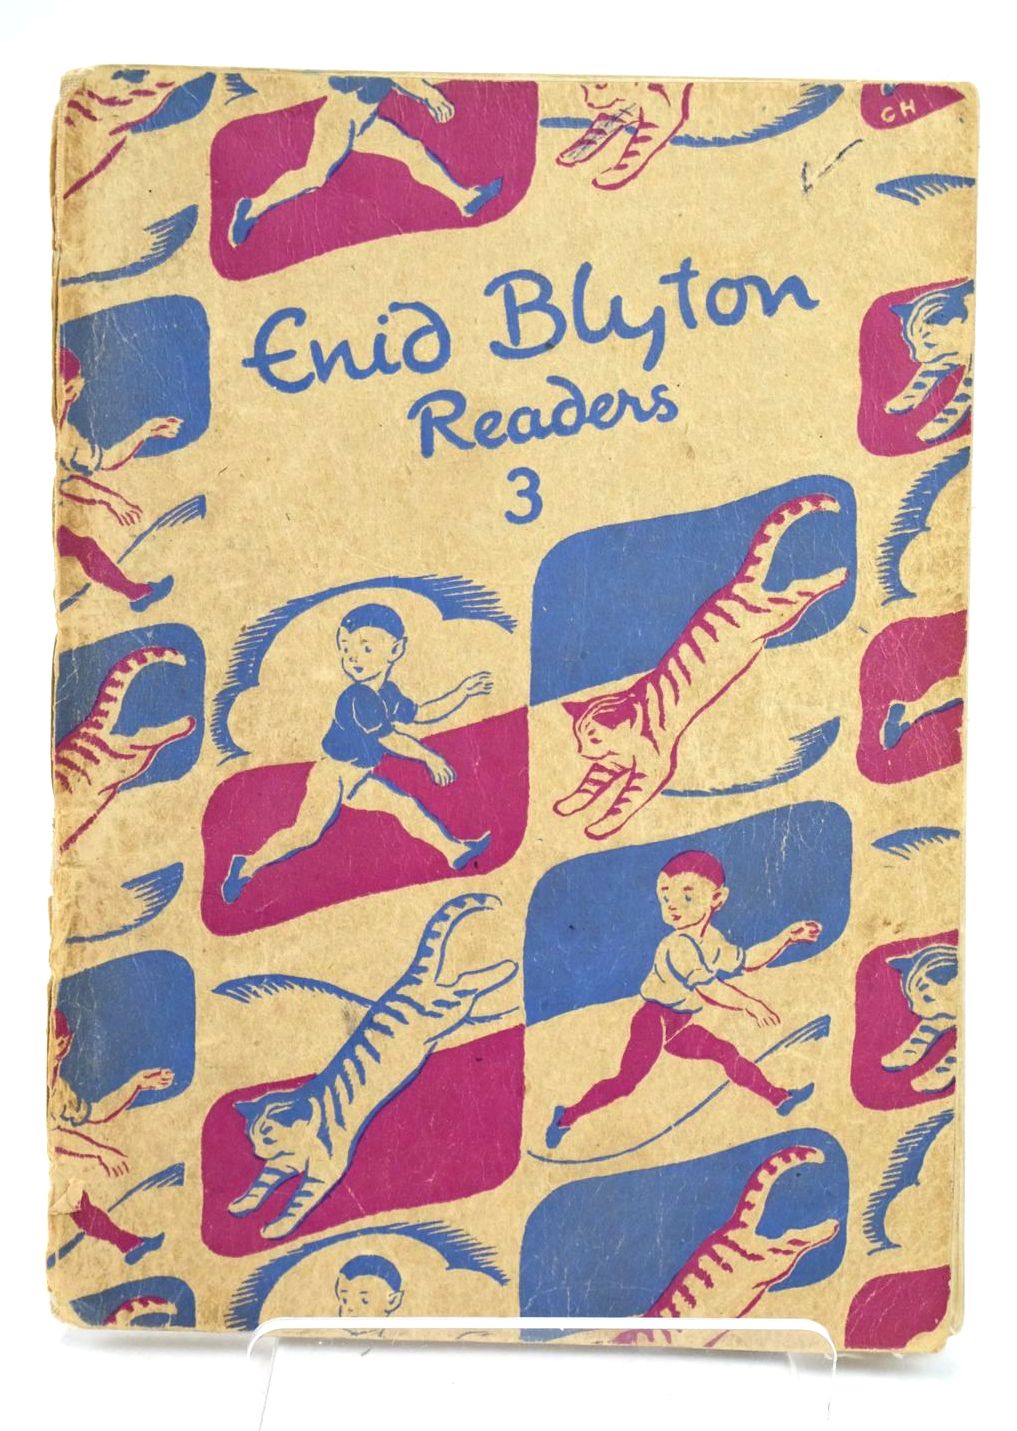 Photo of ENID BLYTON READERS 3 written by Blyton, Enid illustrated by Soper, Eileen published by Macmillan &amp; Co. Ltd. (STOCK CODE: 1318987)  for sale by Stella & Rose's Books